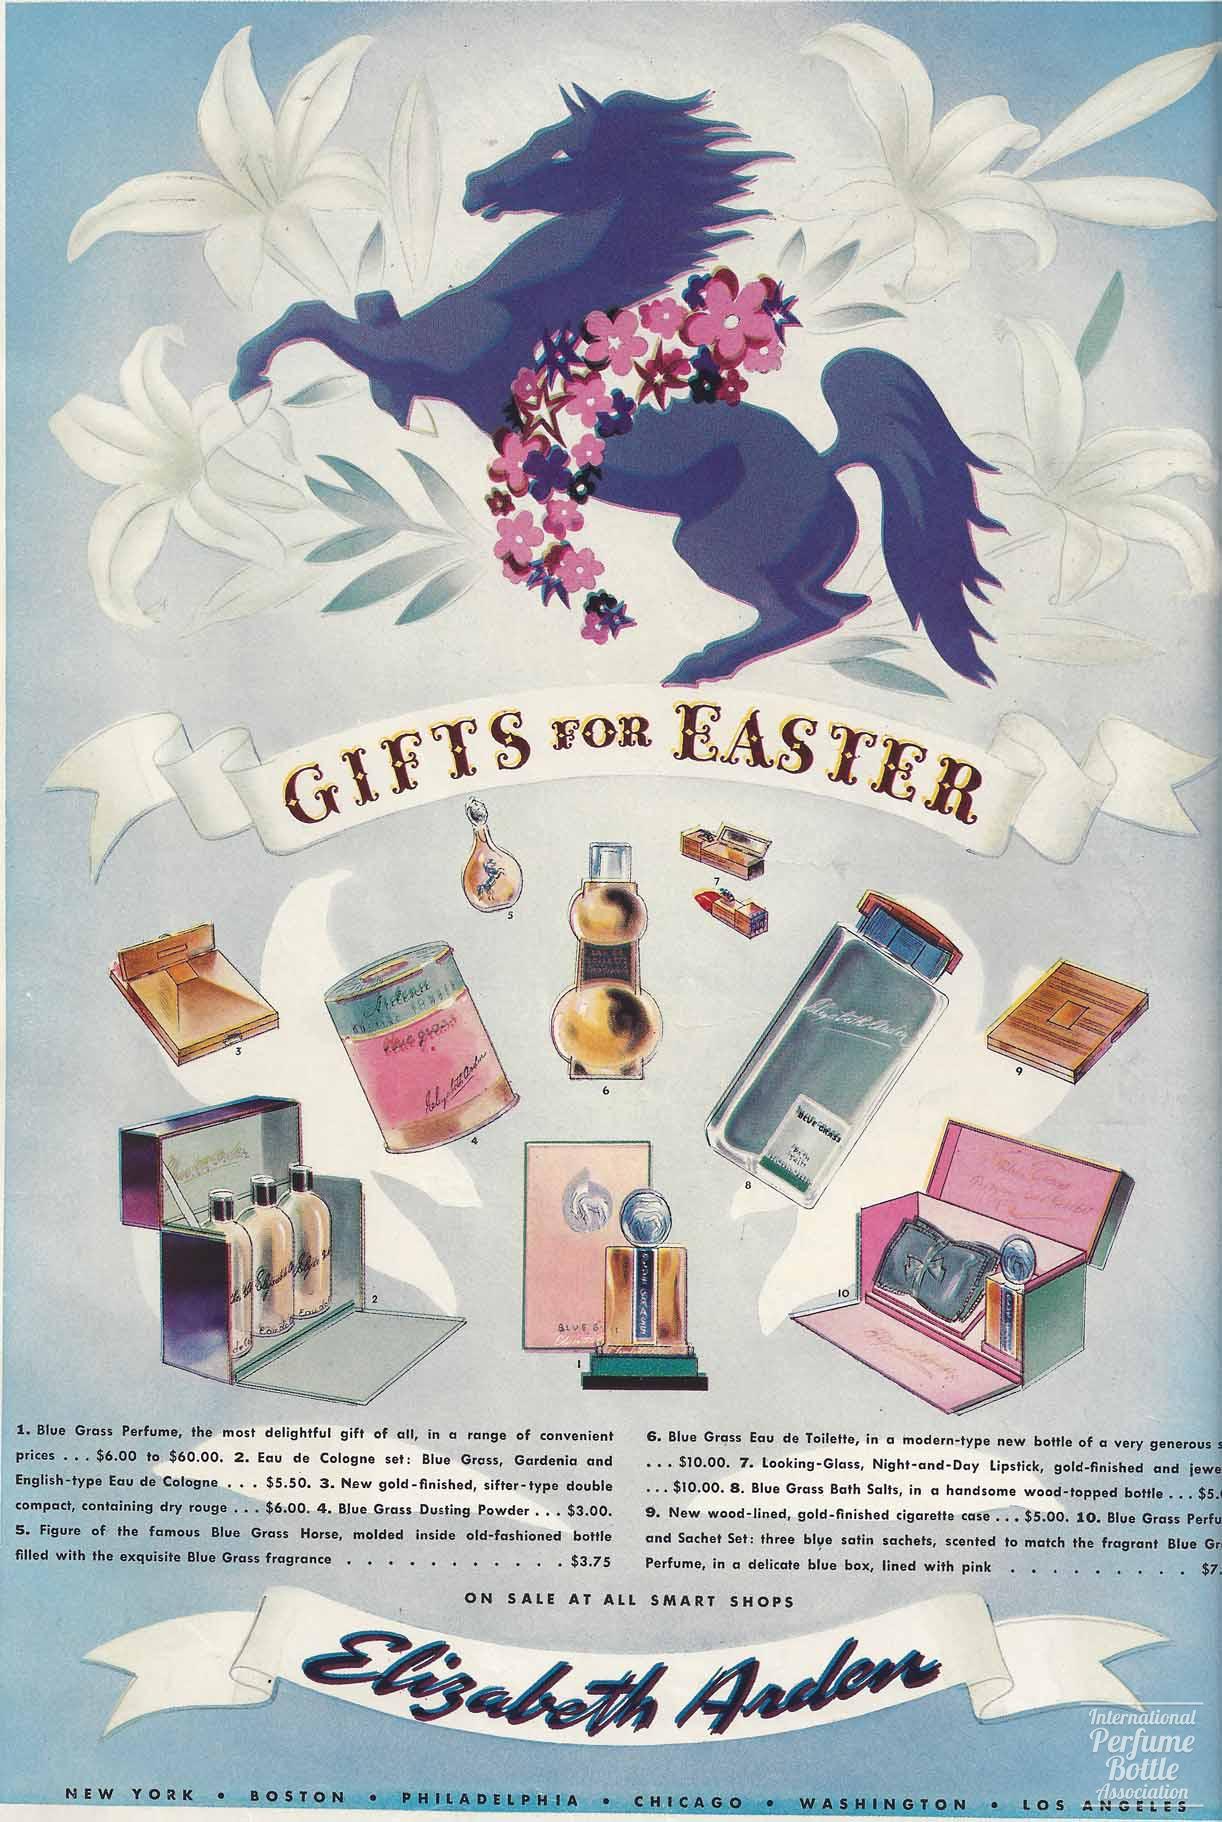 Gifts for Easter by Elizabeth Arden Advertisement - 1938